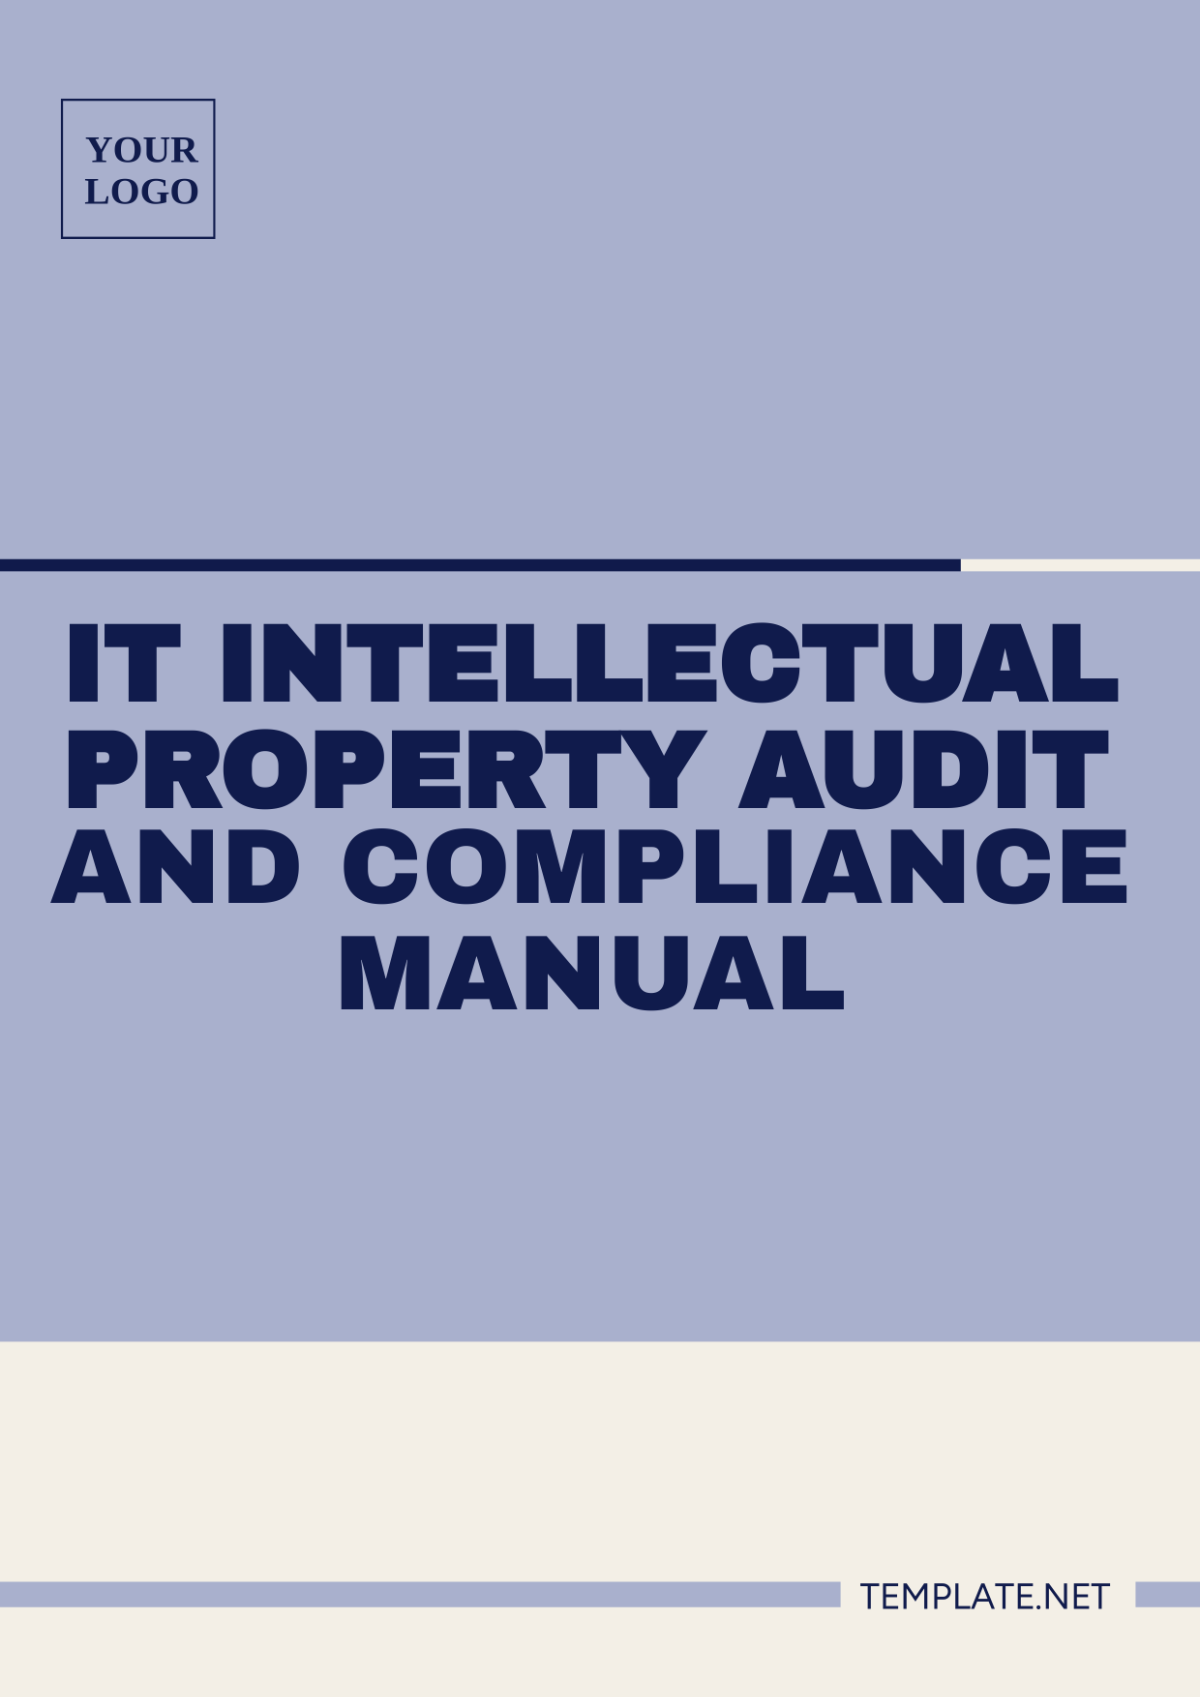 IT Intellectual Property Audit And Compliance Manual Template